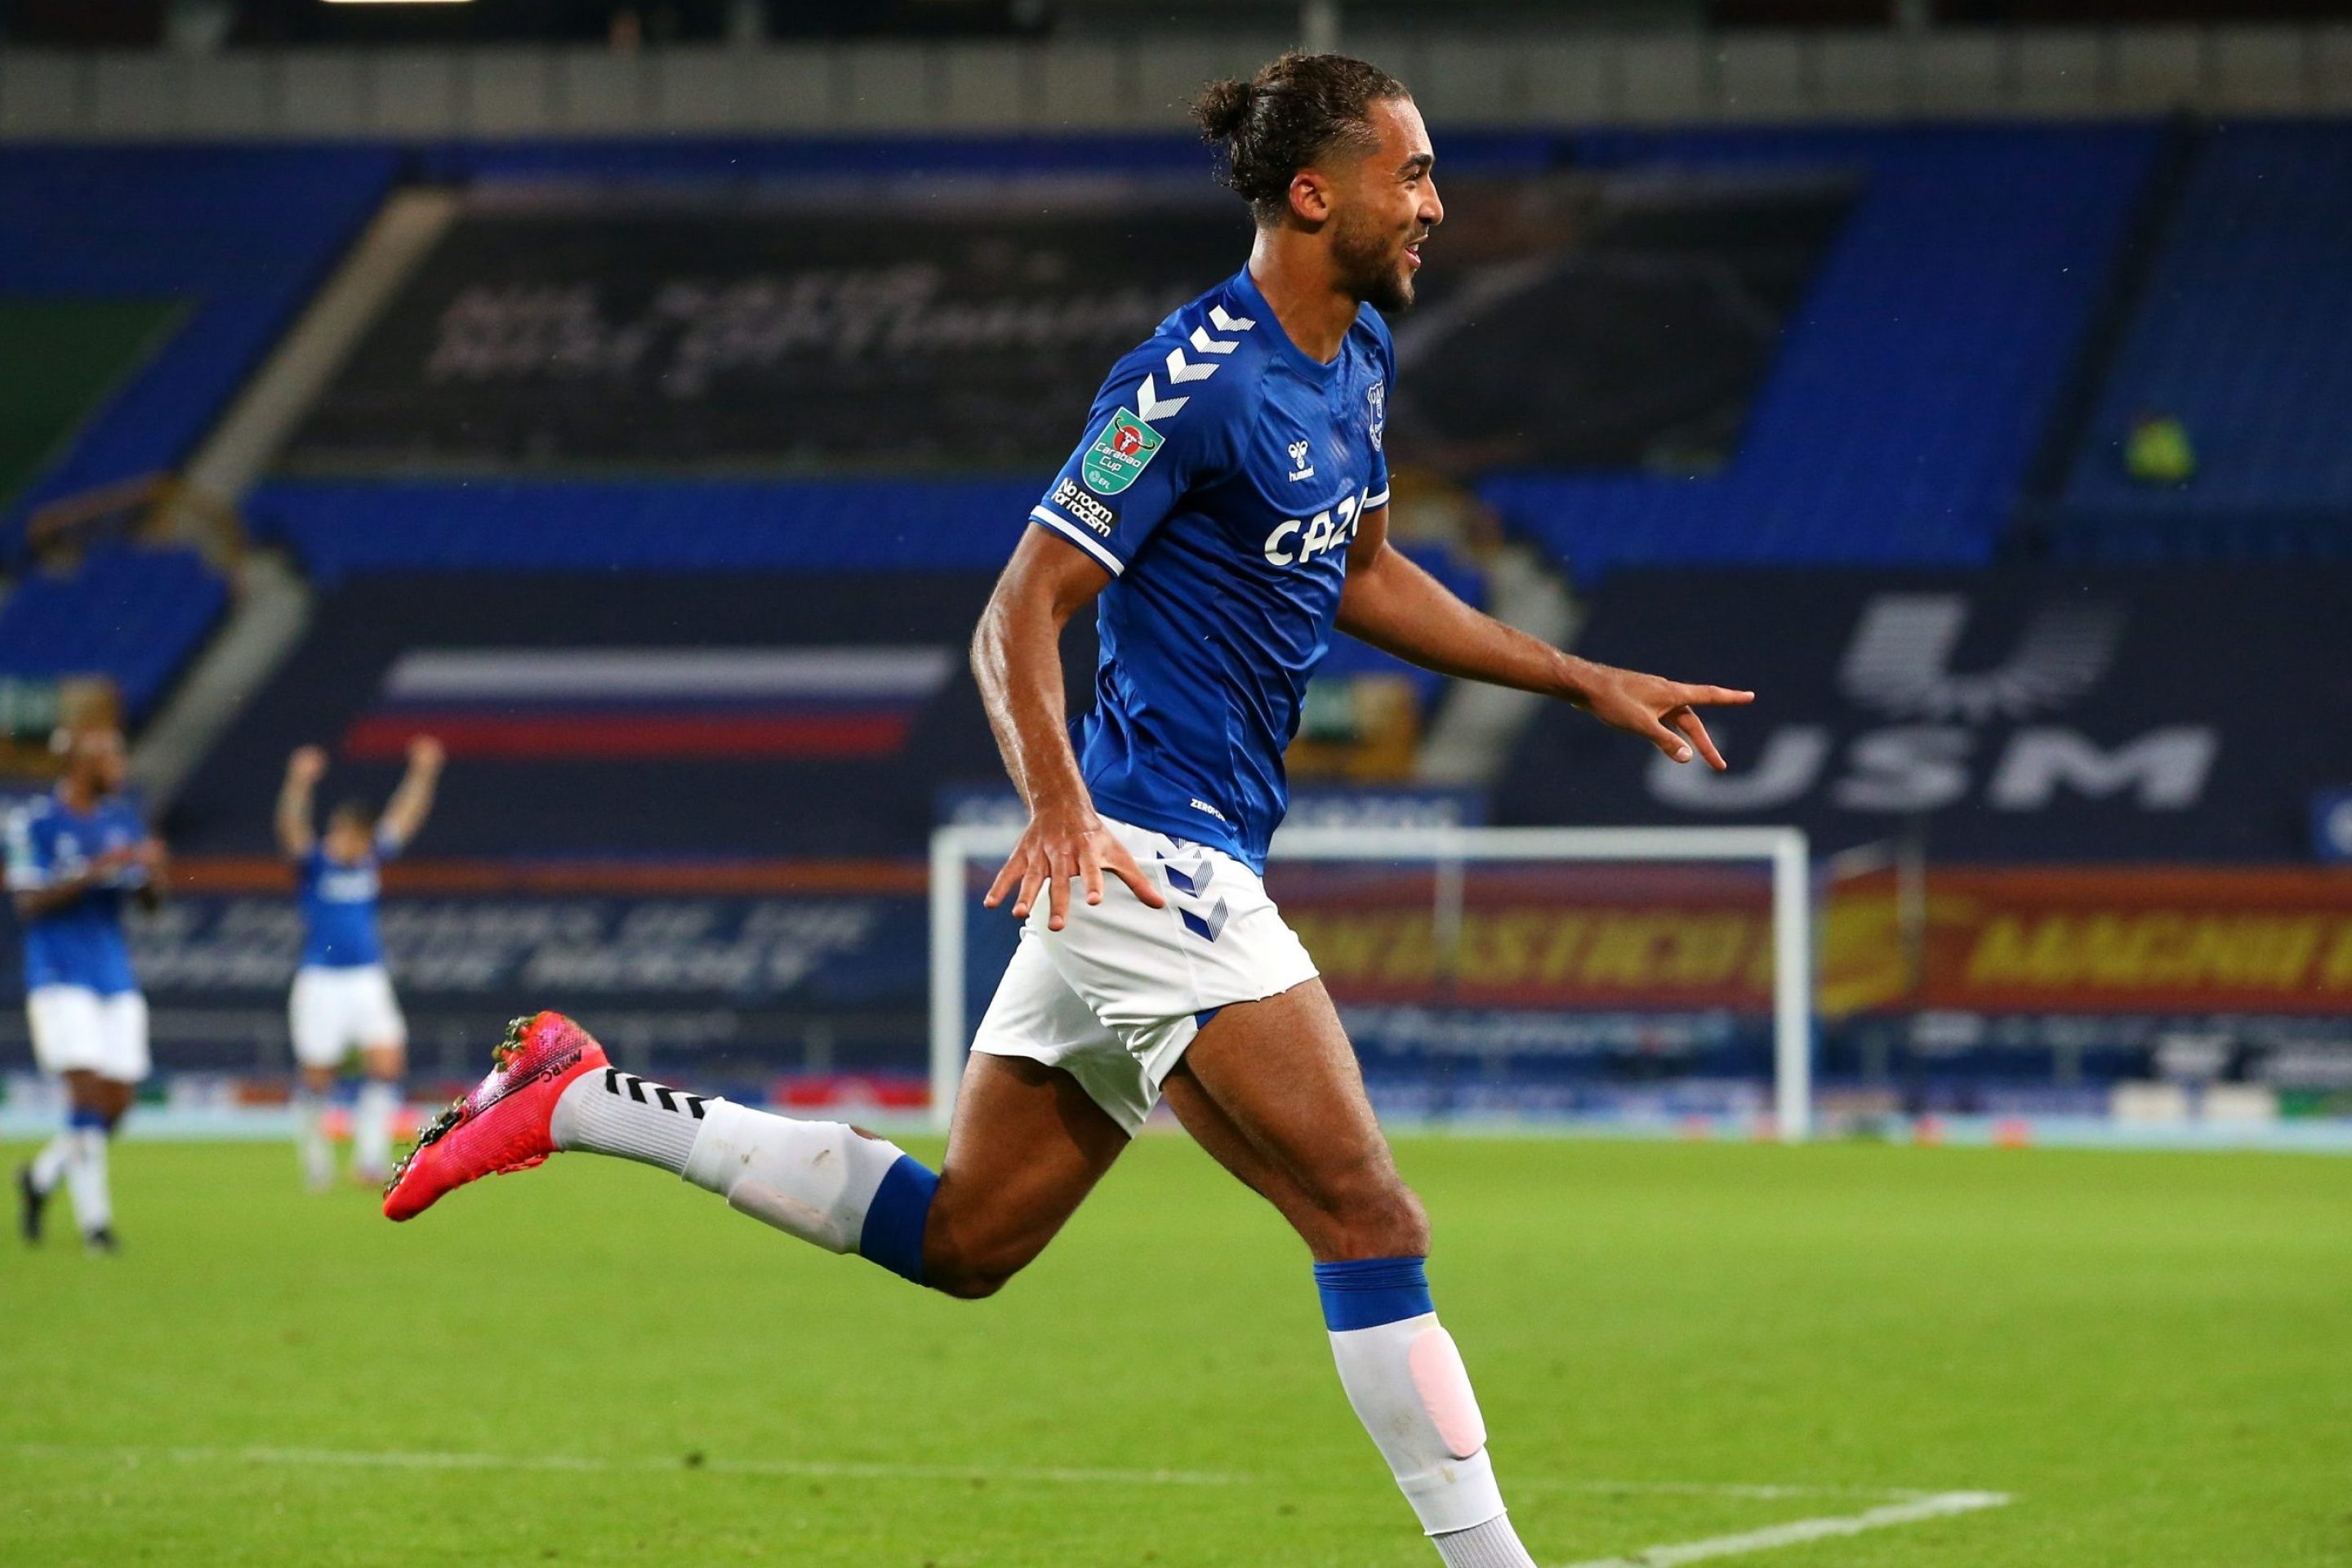 Dominic Calvert-Lewin of Everton celebrates after scoring his sides fourth goal during the Carabao Cup fourth round match between Everton and West Ham United at Goodison Park